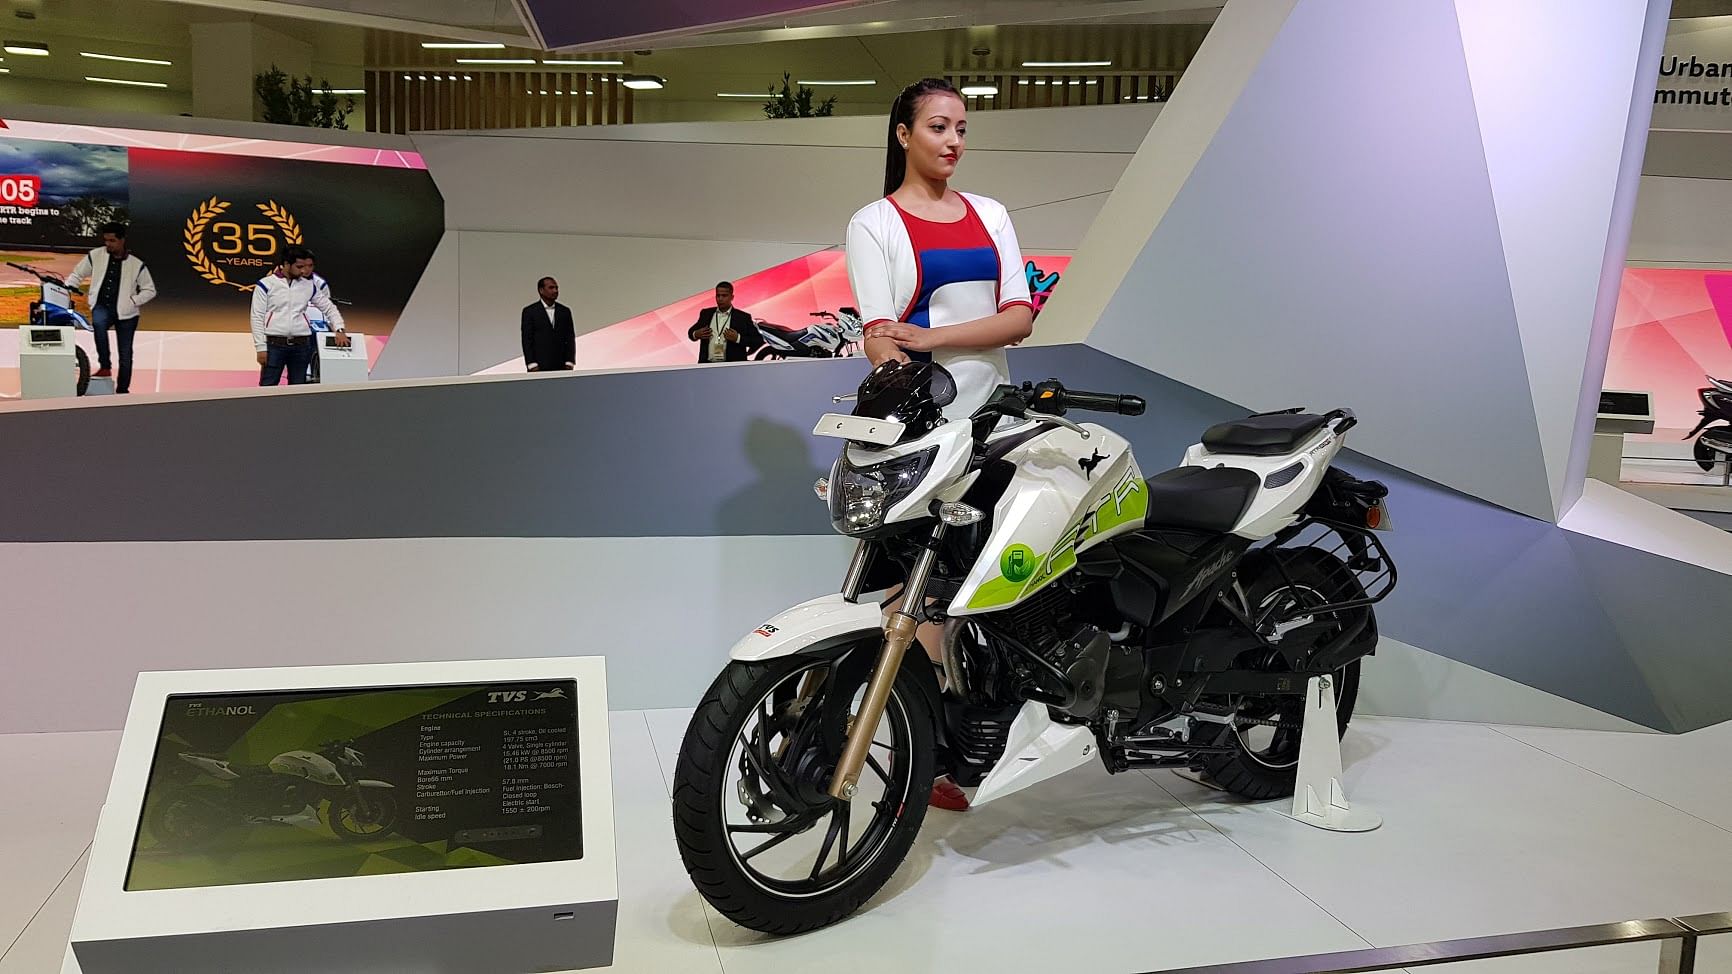 TVS showcased an ethanol-powered Apache 200 at the Auto Expo.